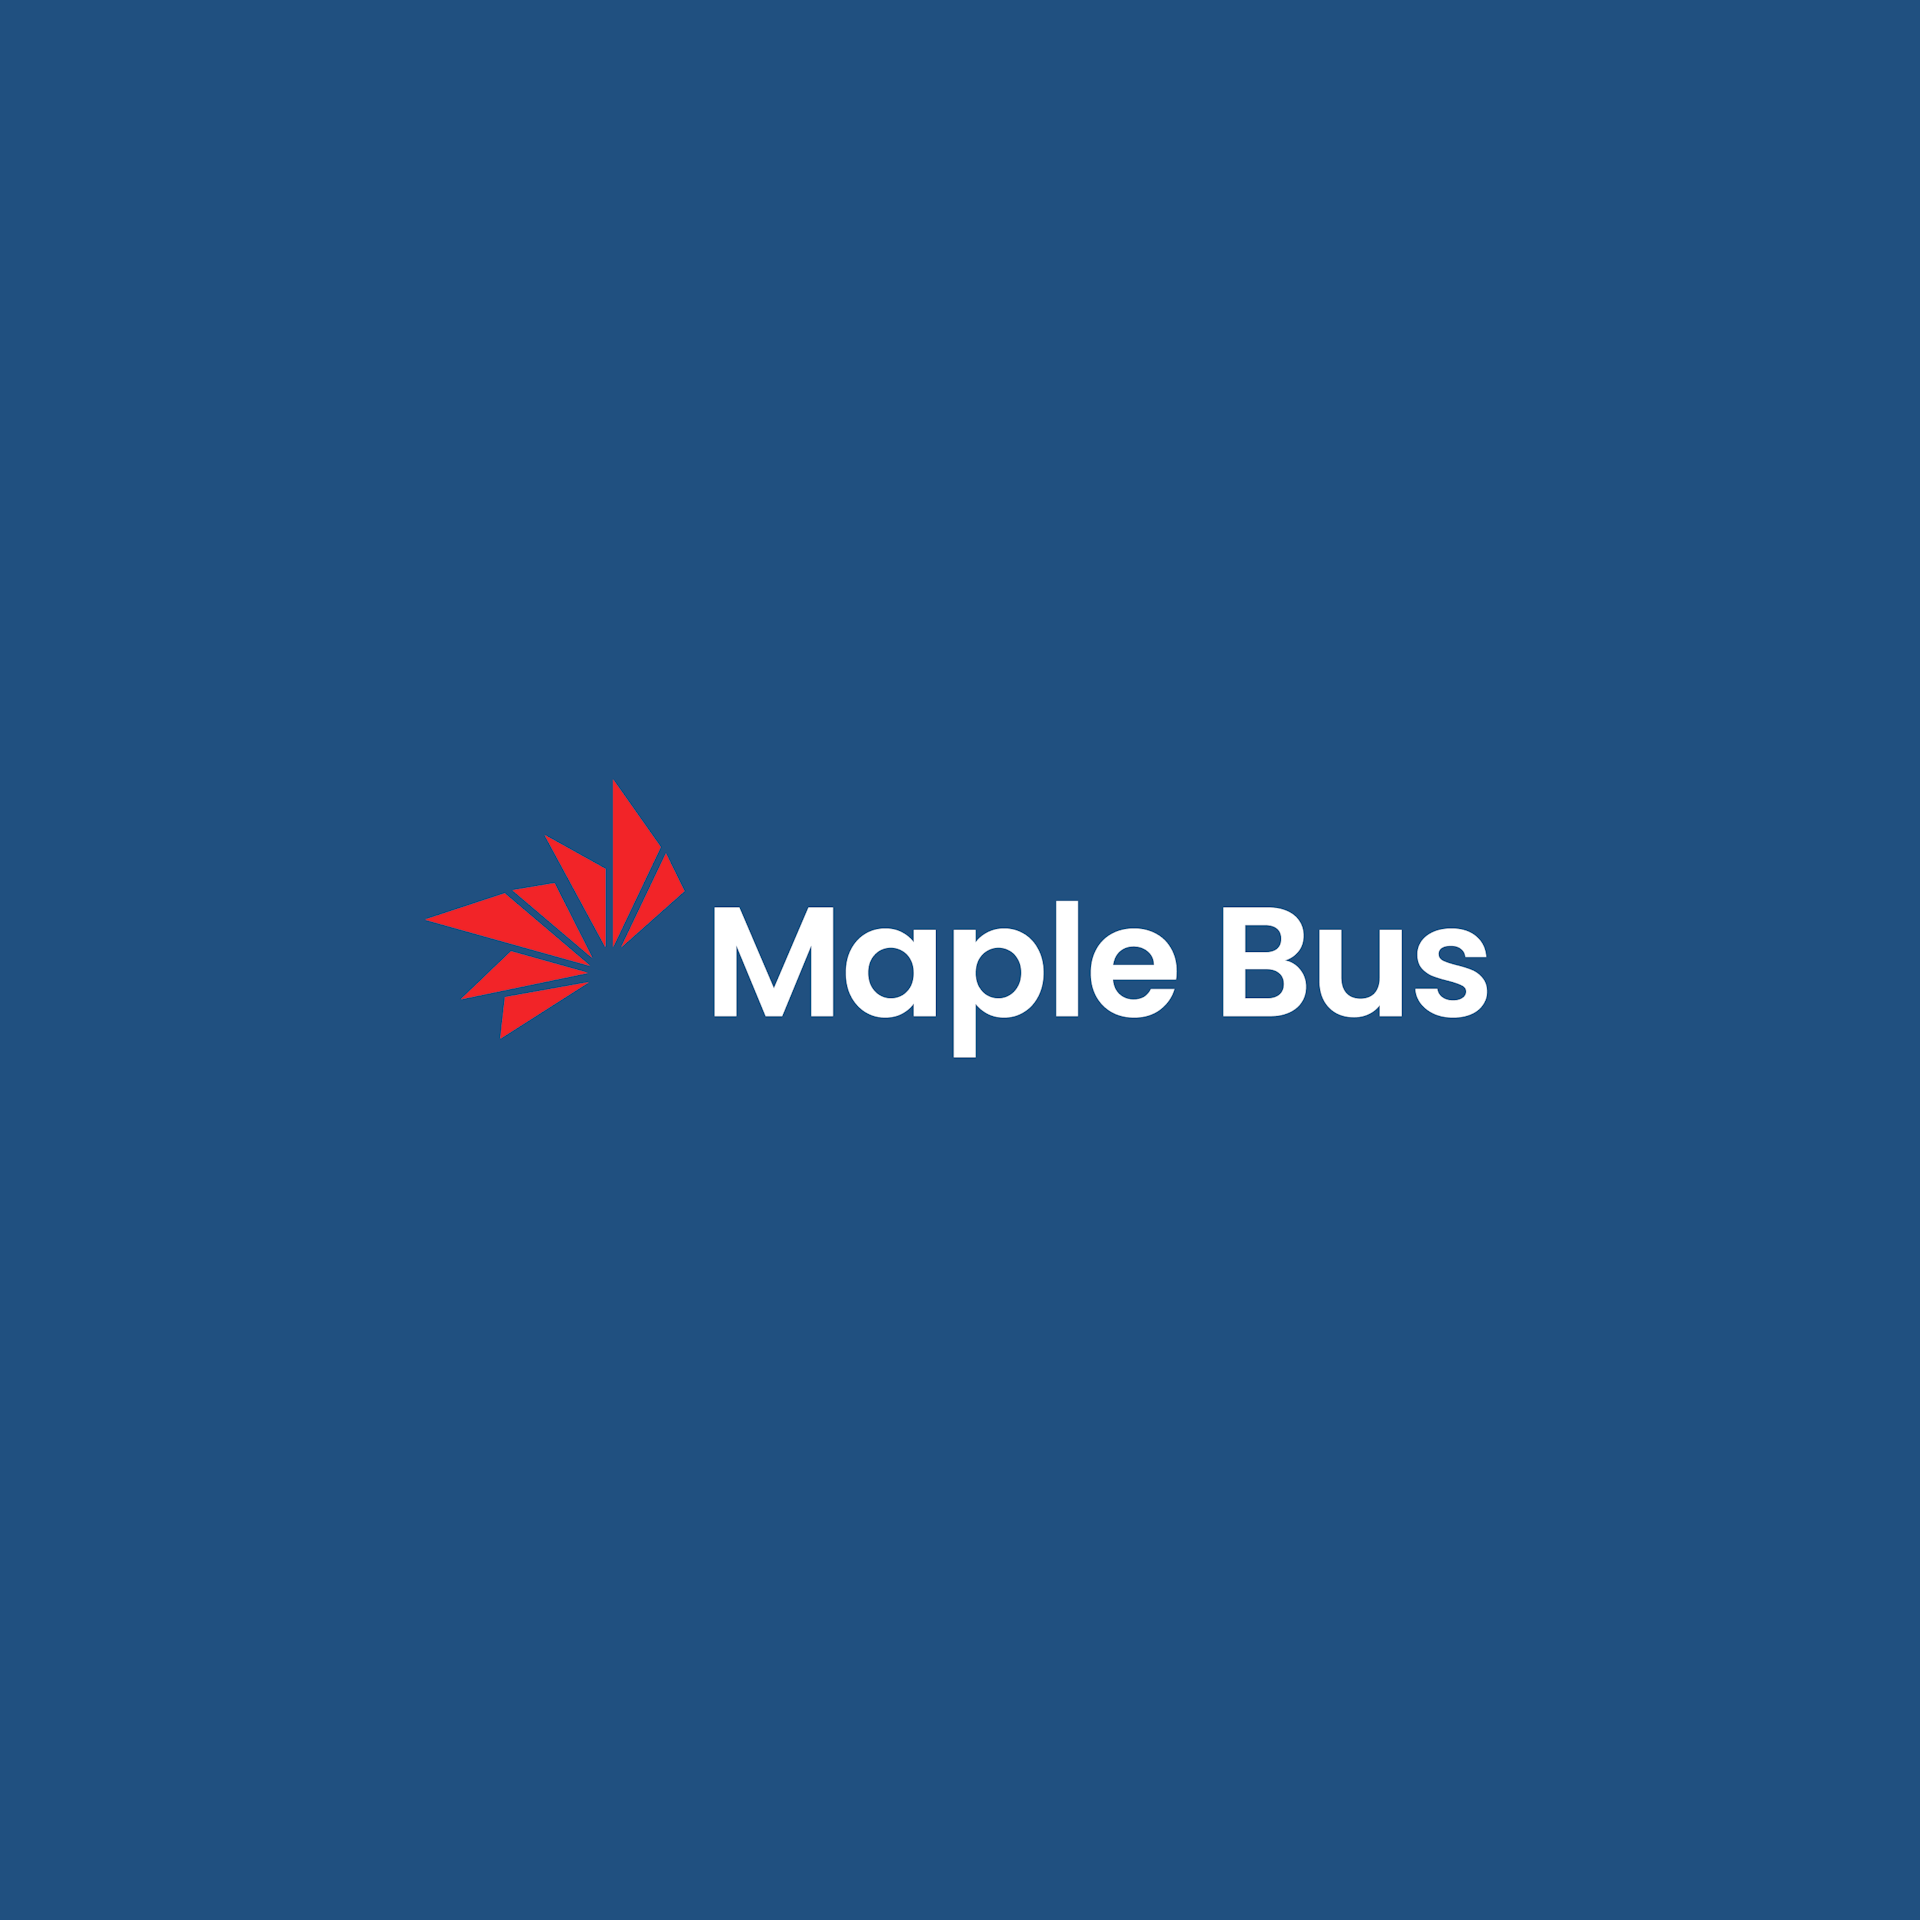 Maplebus: A Canadian transportation success story powered by SEO